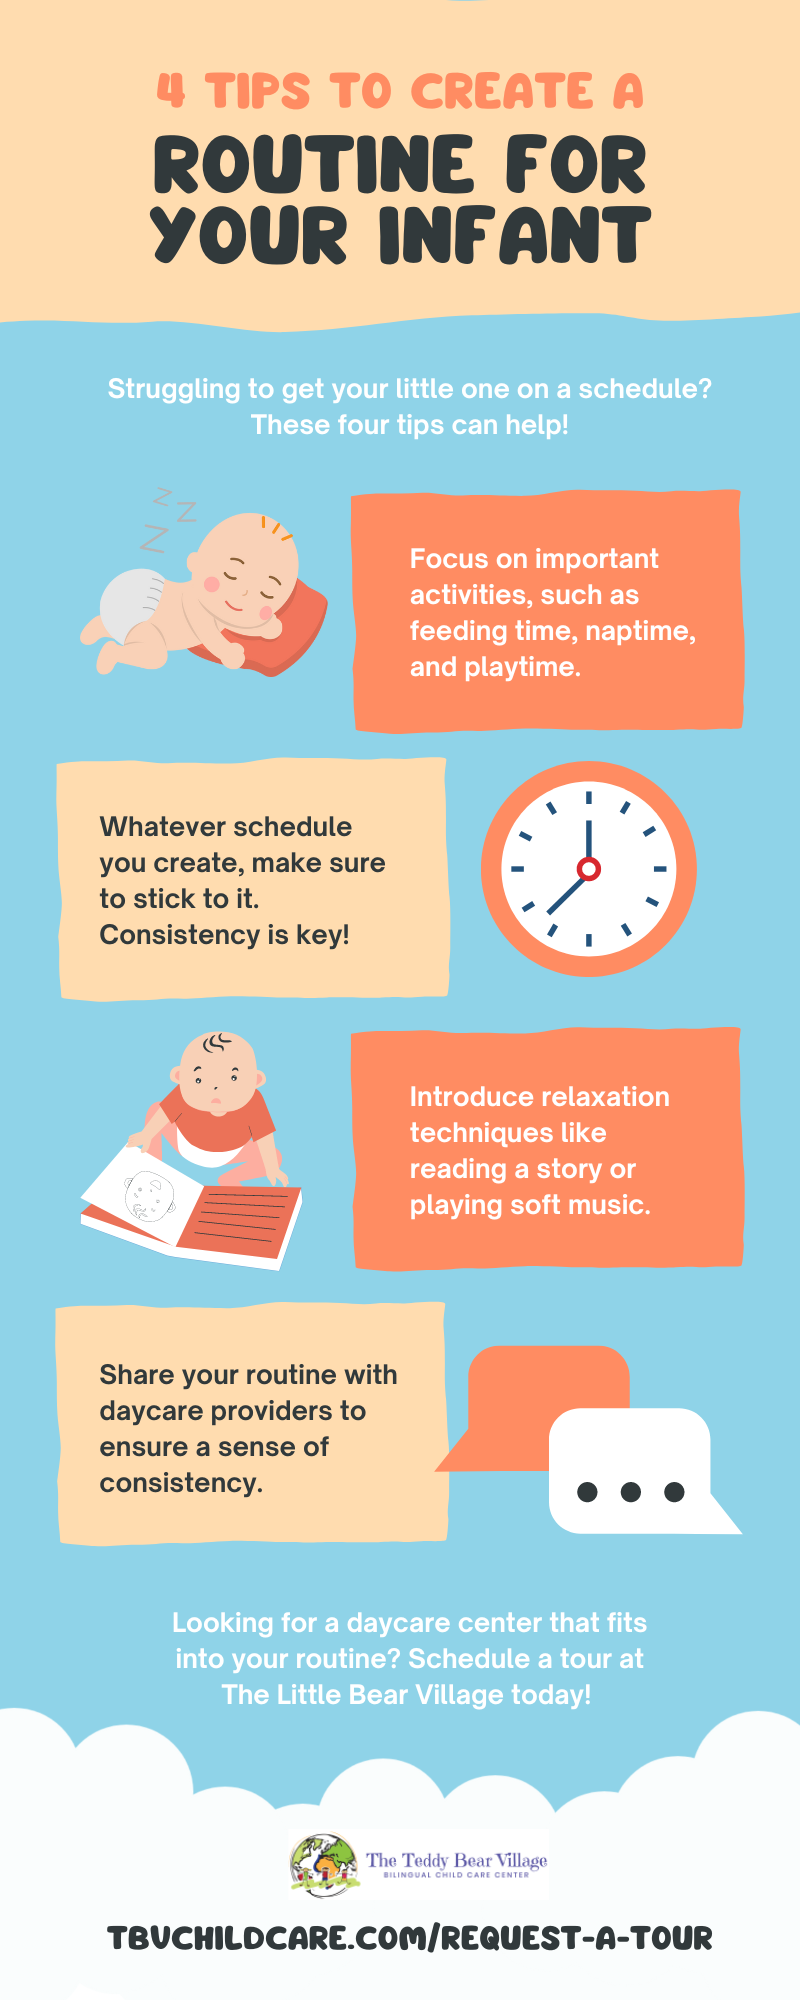 4 Tips To Create a Routine for Your Infant